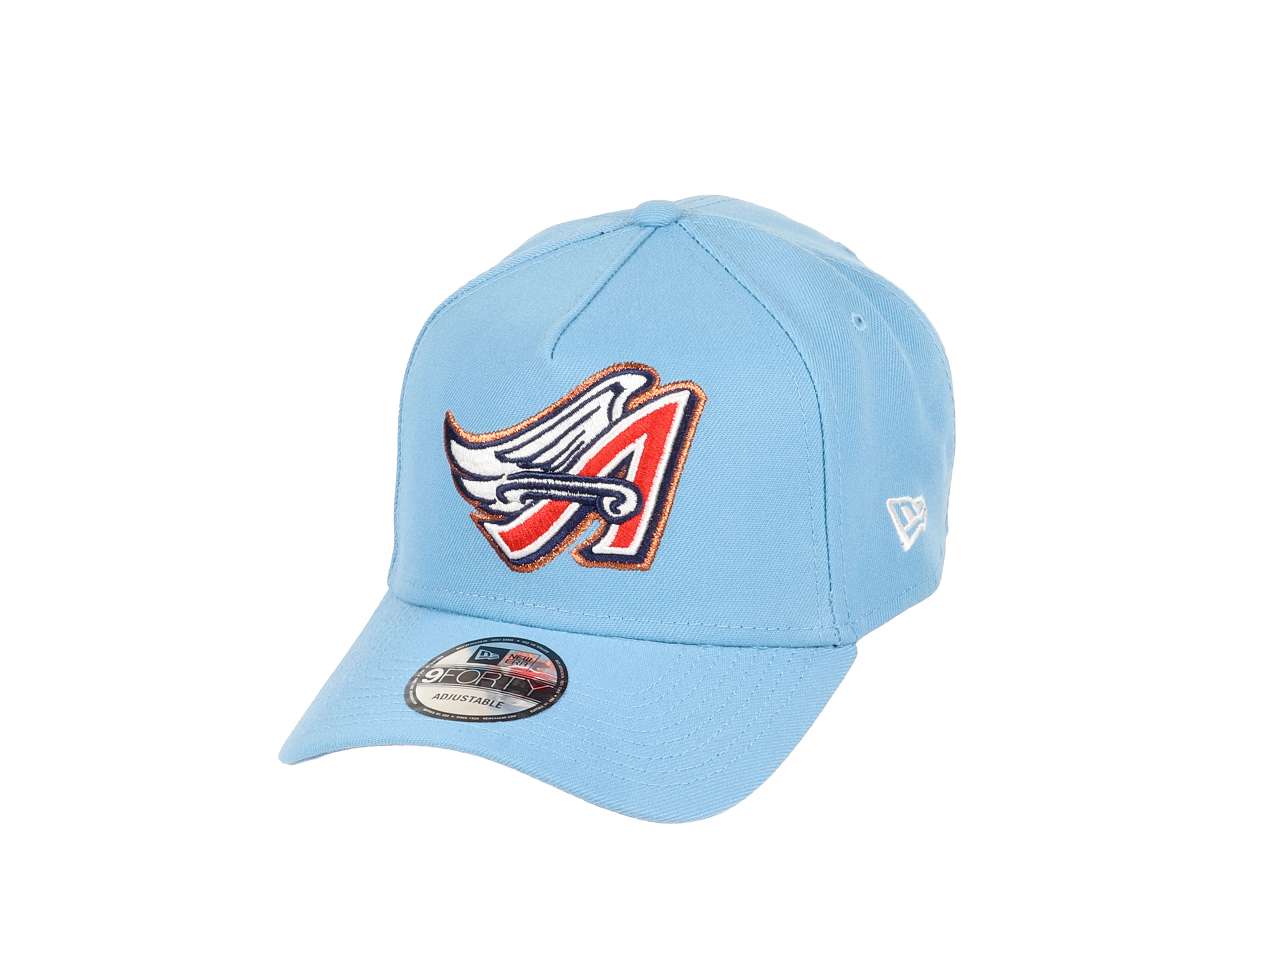 Anaheim Angels MLB Cooperstown Skyblue White 9Forty A-Frame Snapback Cap New Era